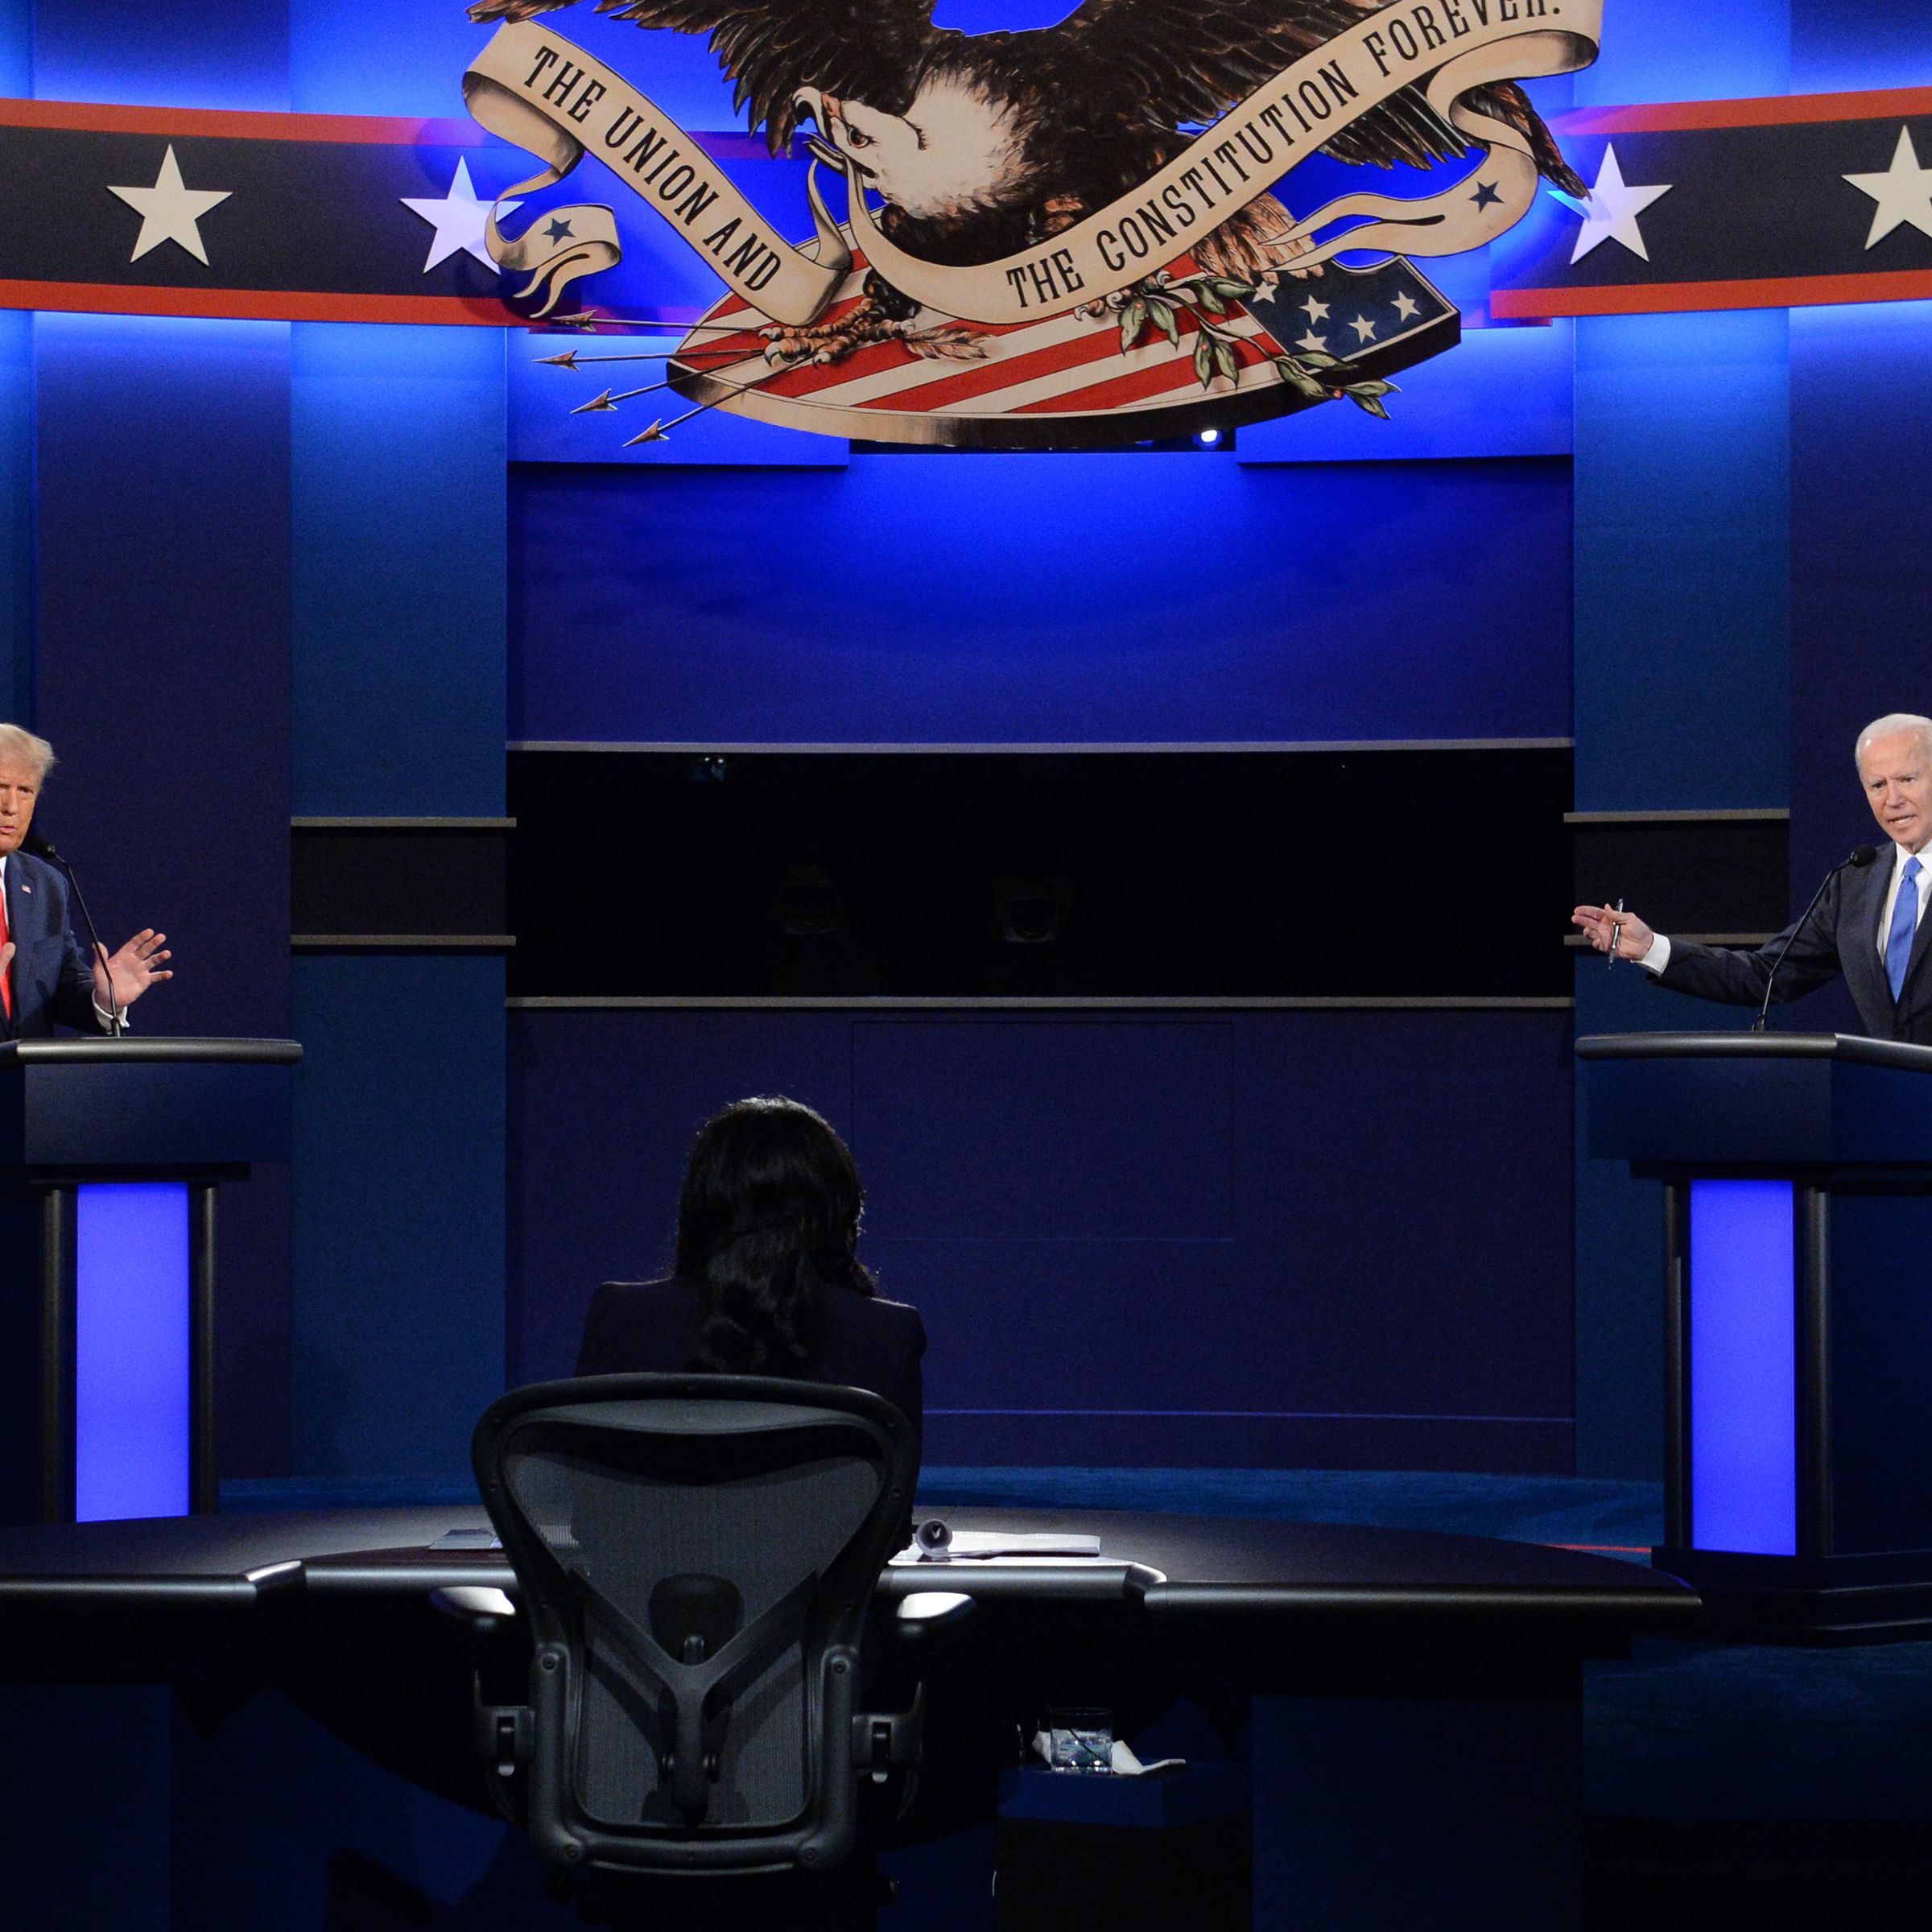 Former President Donald Trump (left) and President Joe Biden (right) stand at podiums during their last 2020 debate.